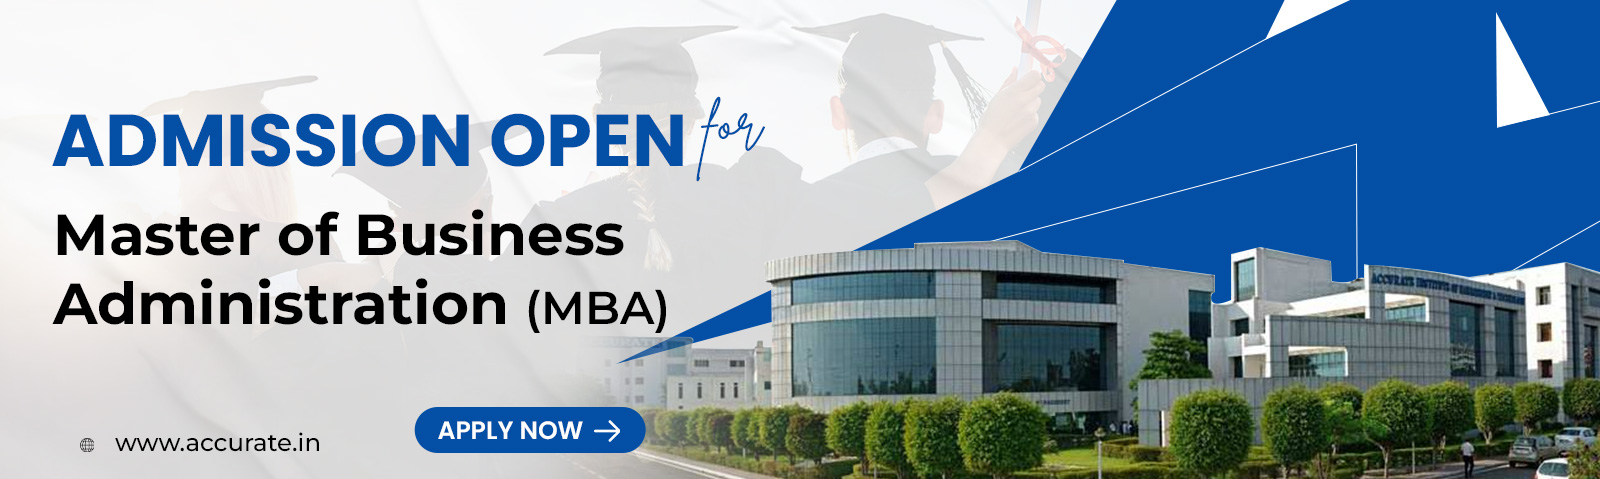 MBA Global Business Management Course